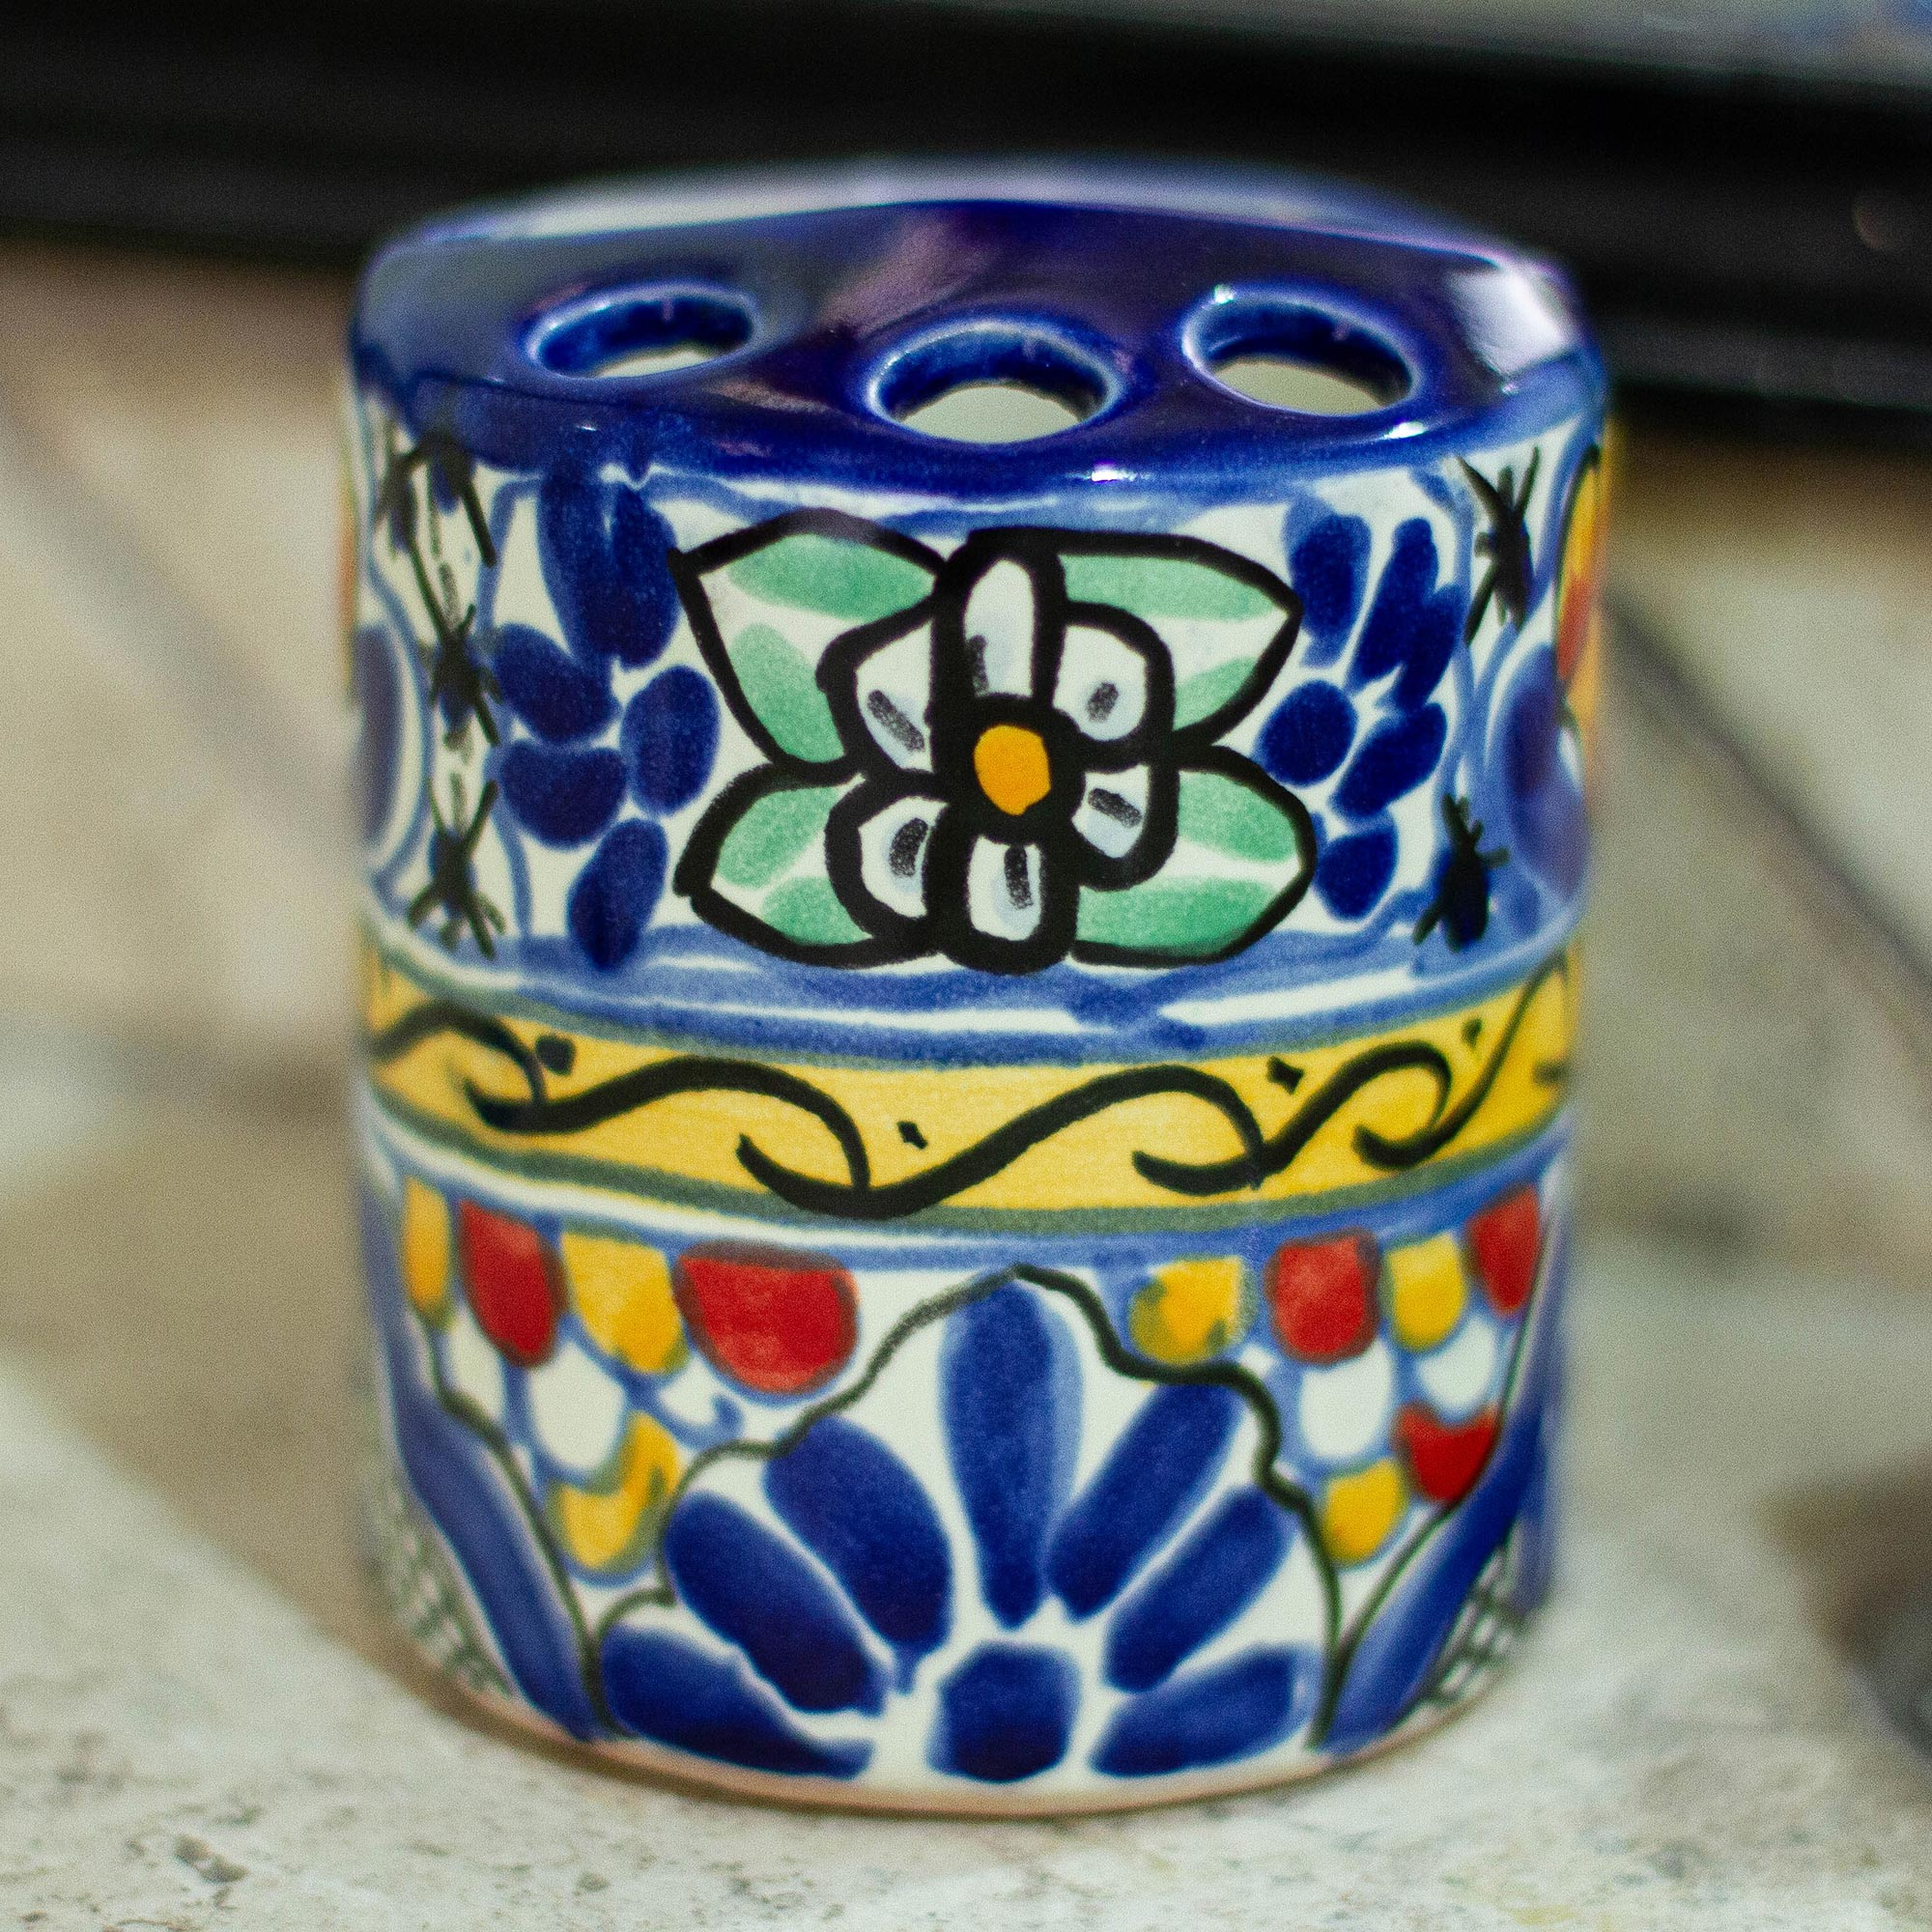 Toothbrush Holder – Missions Pottery and More